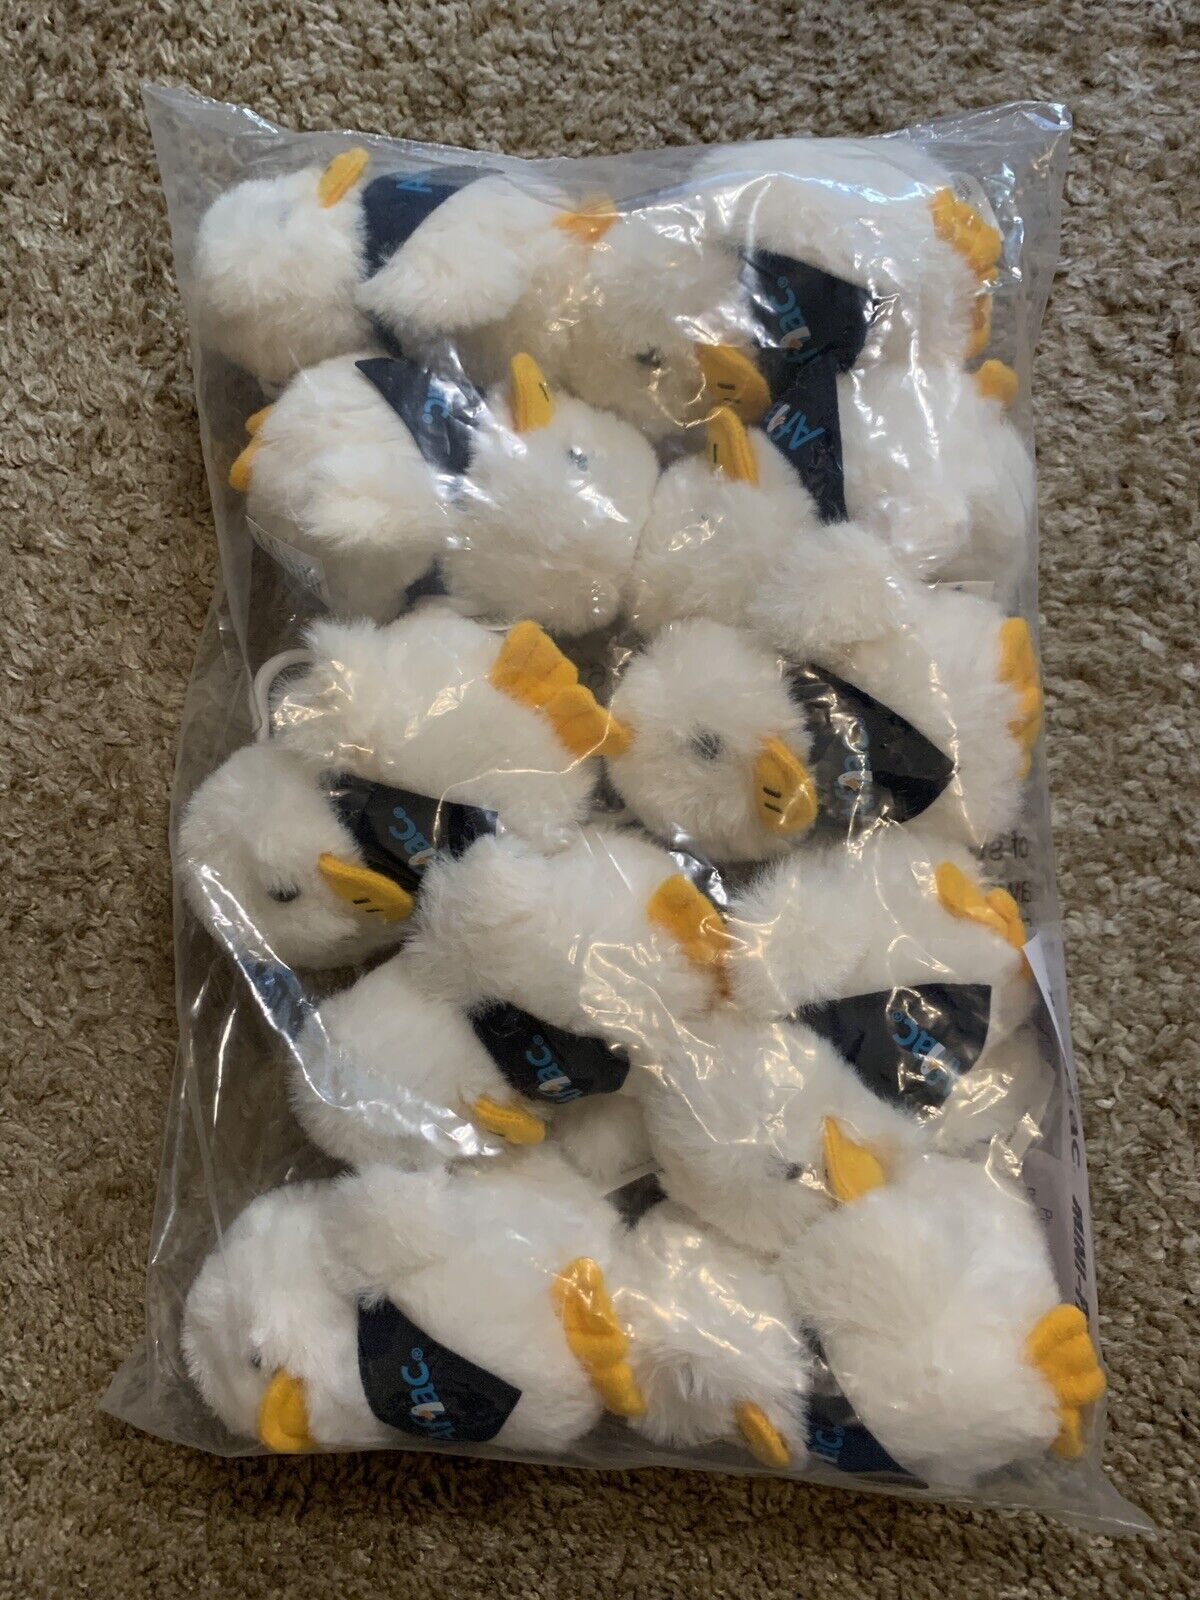 10 New In Package Talking Aflac Ducks 3” Tall